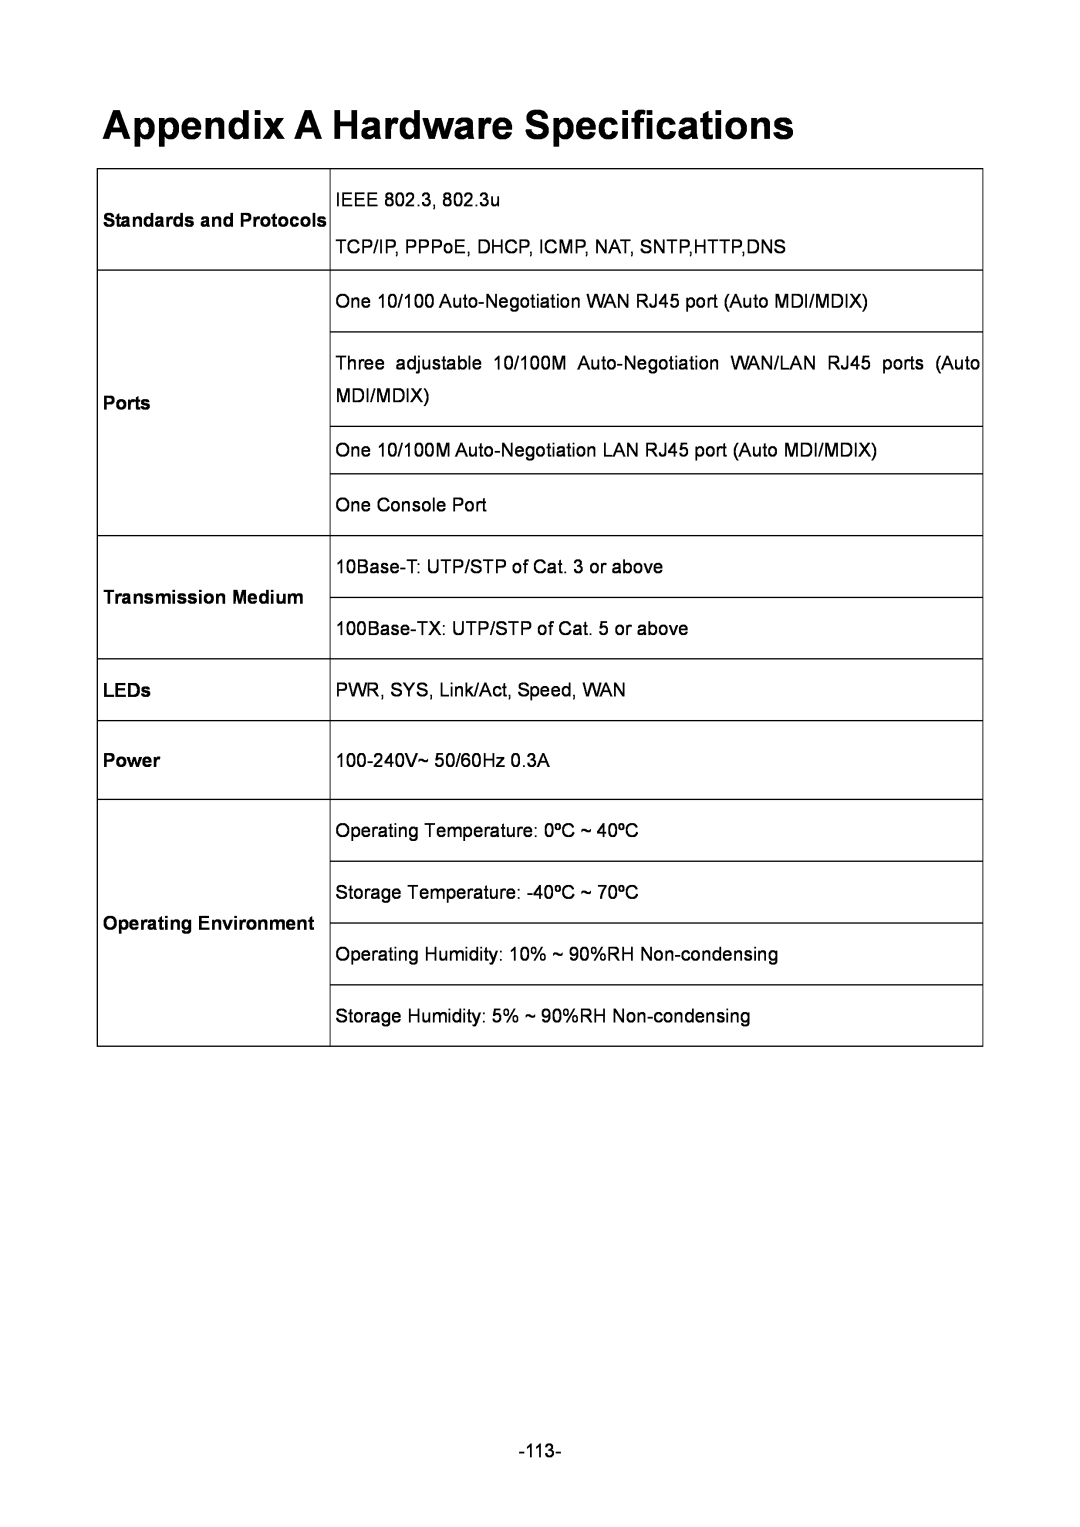 TP-Link 1910010933 Appendix A Hardware Specifications, Ports, Transmission Medium, LEDs, Power, Operating Environment 